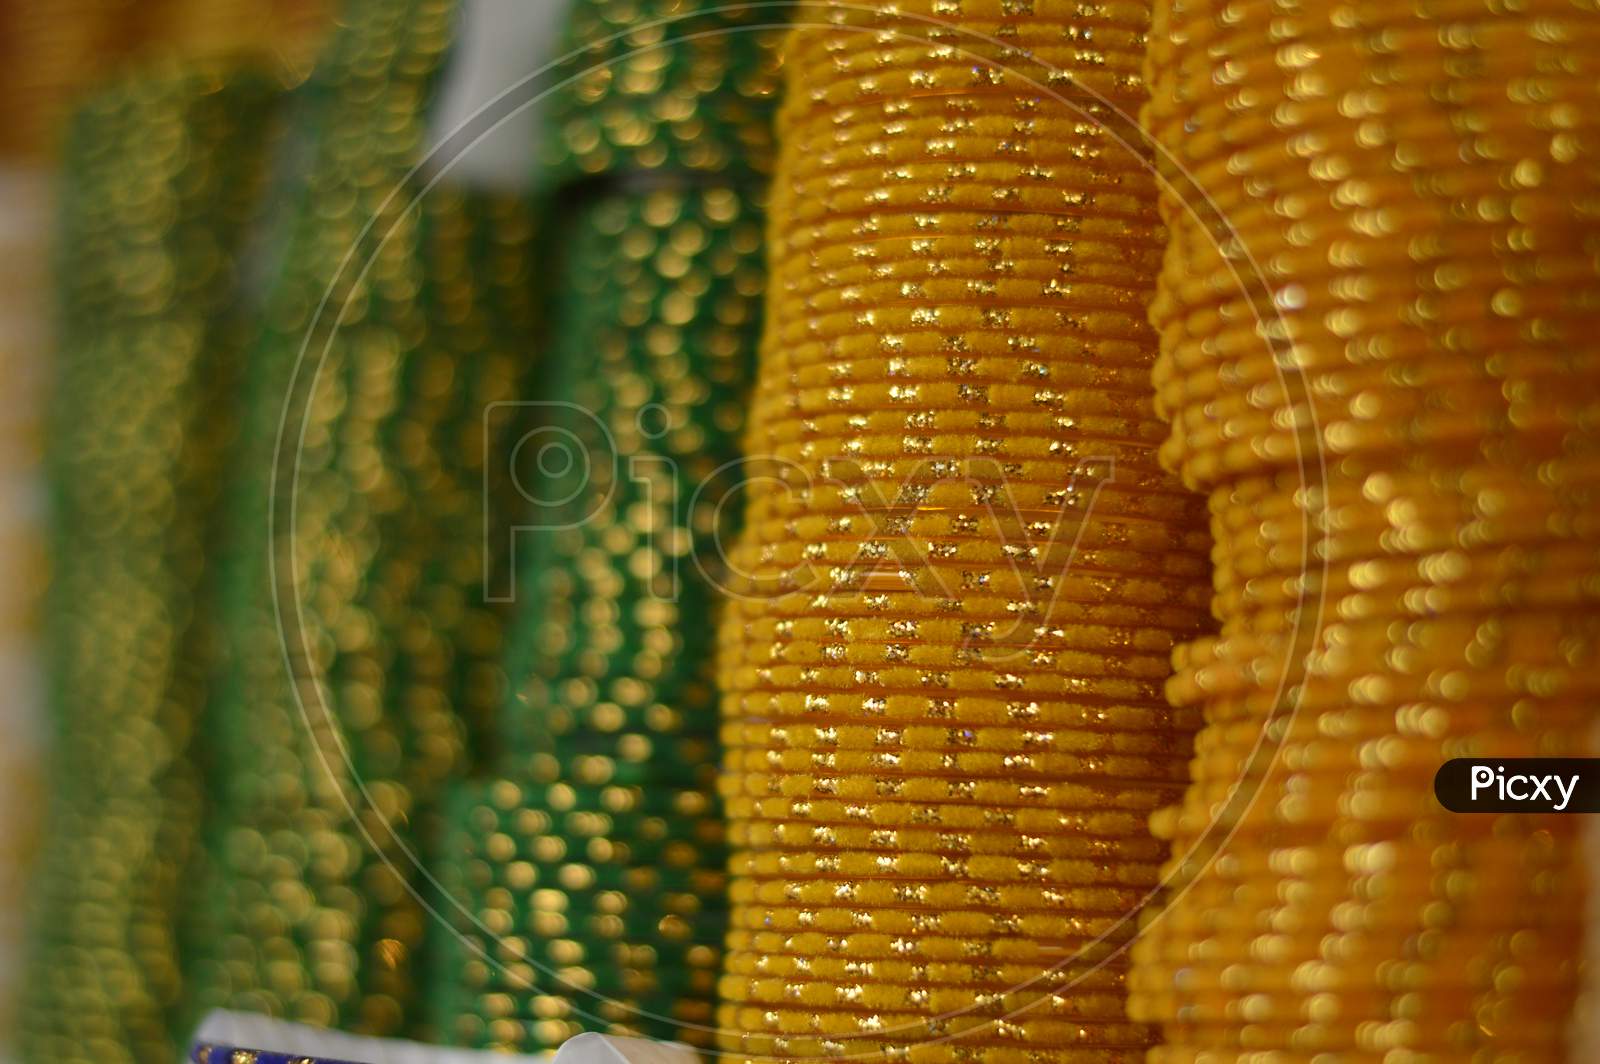 Closeup Of Colourful Bangles in an Vendor Stall